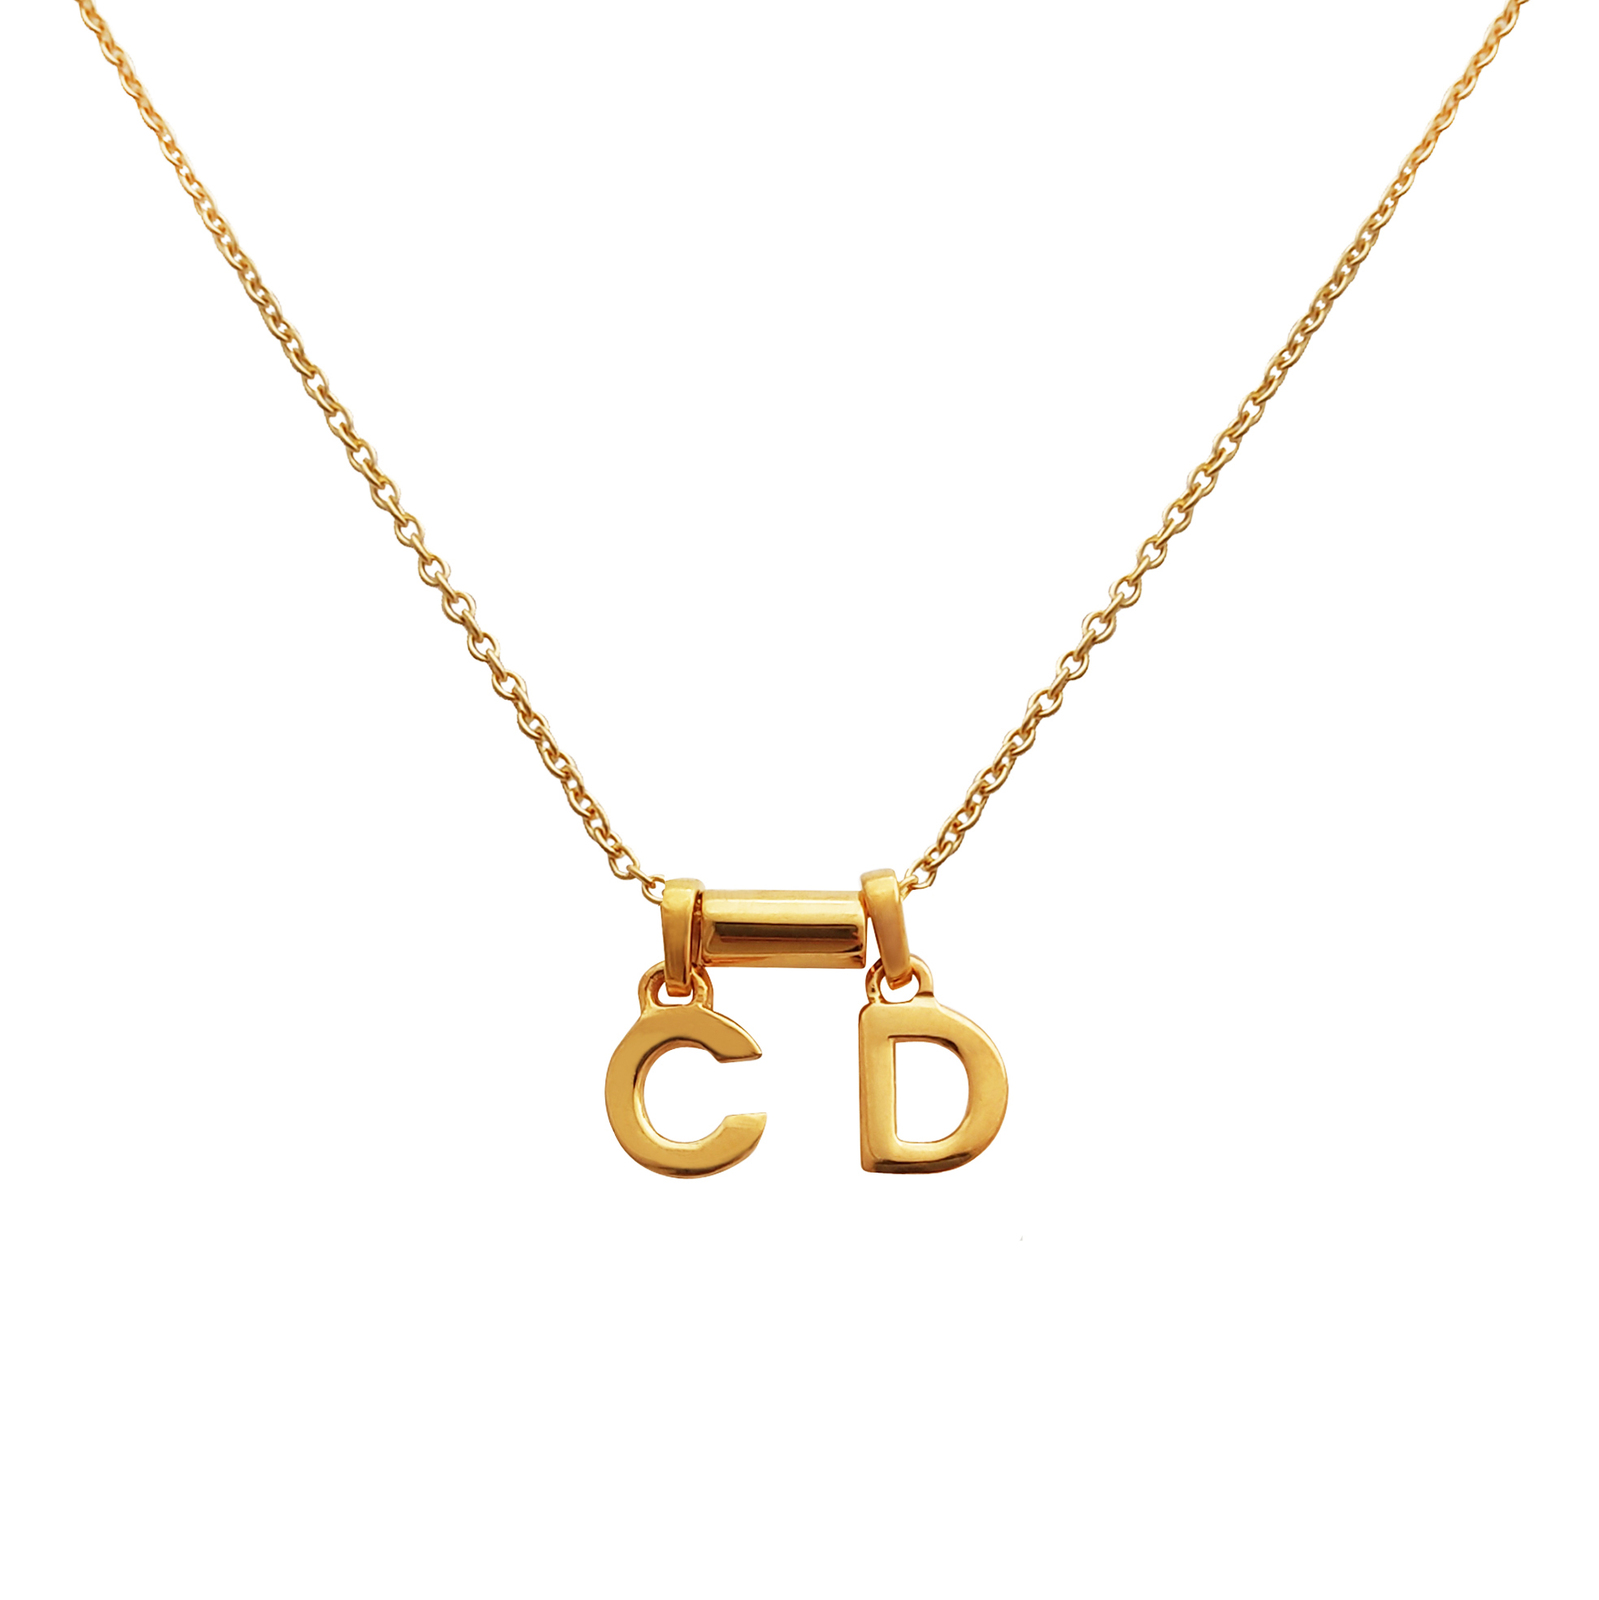 18ct Gold Plated or Sterling Silver Initial Necklace | Hurleyburley